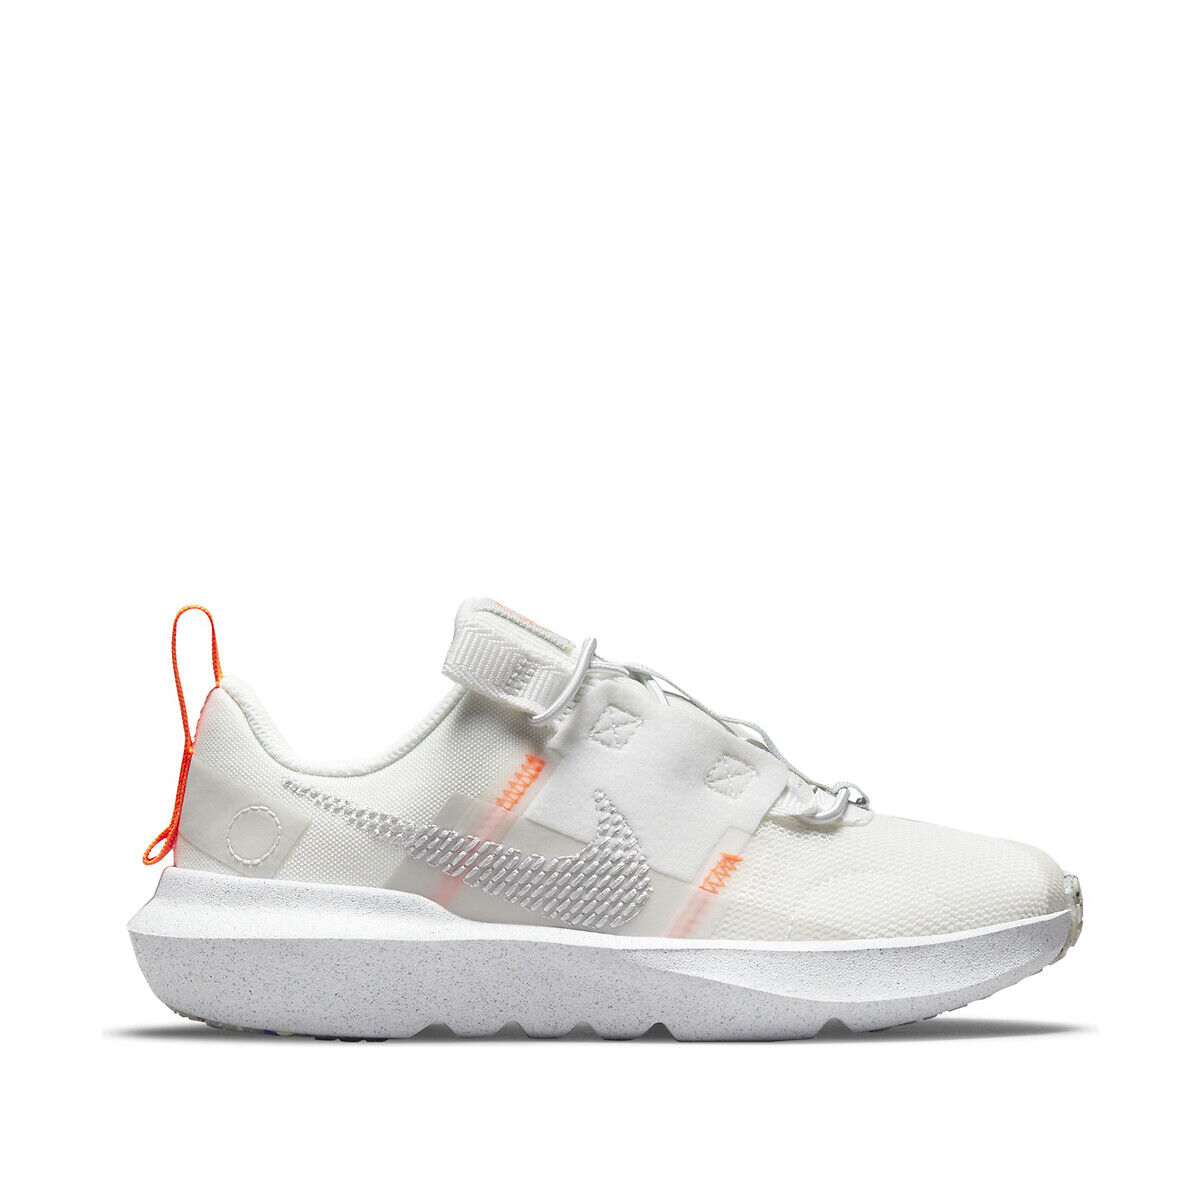 NIKE Sneakers Crater Impact WEISS